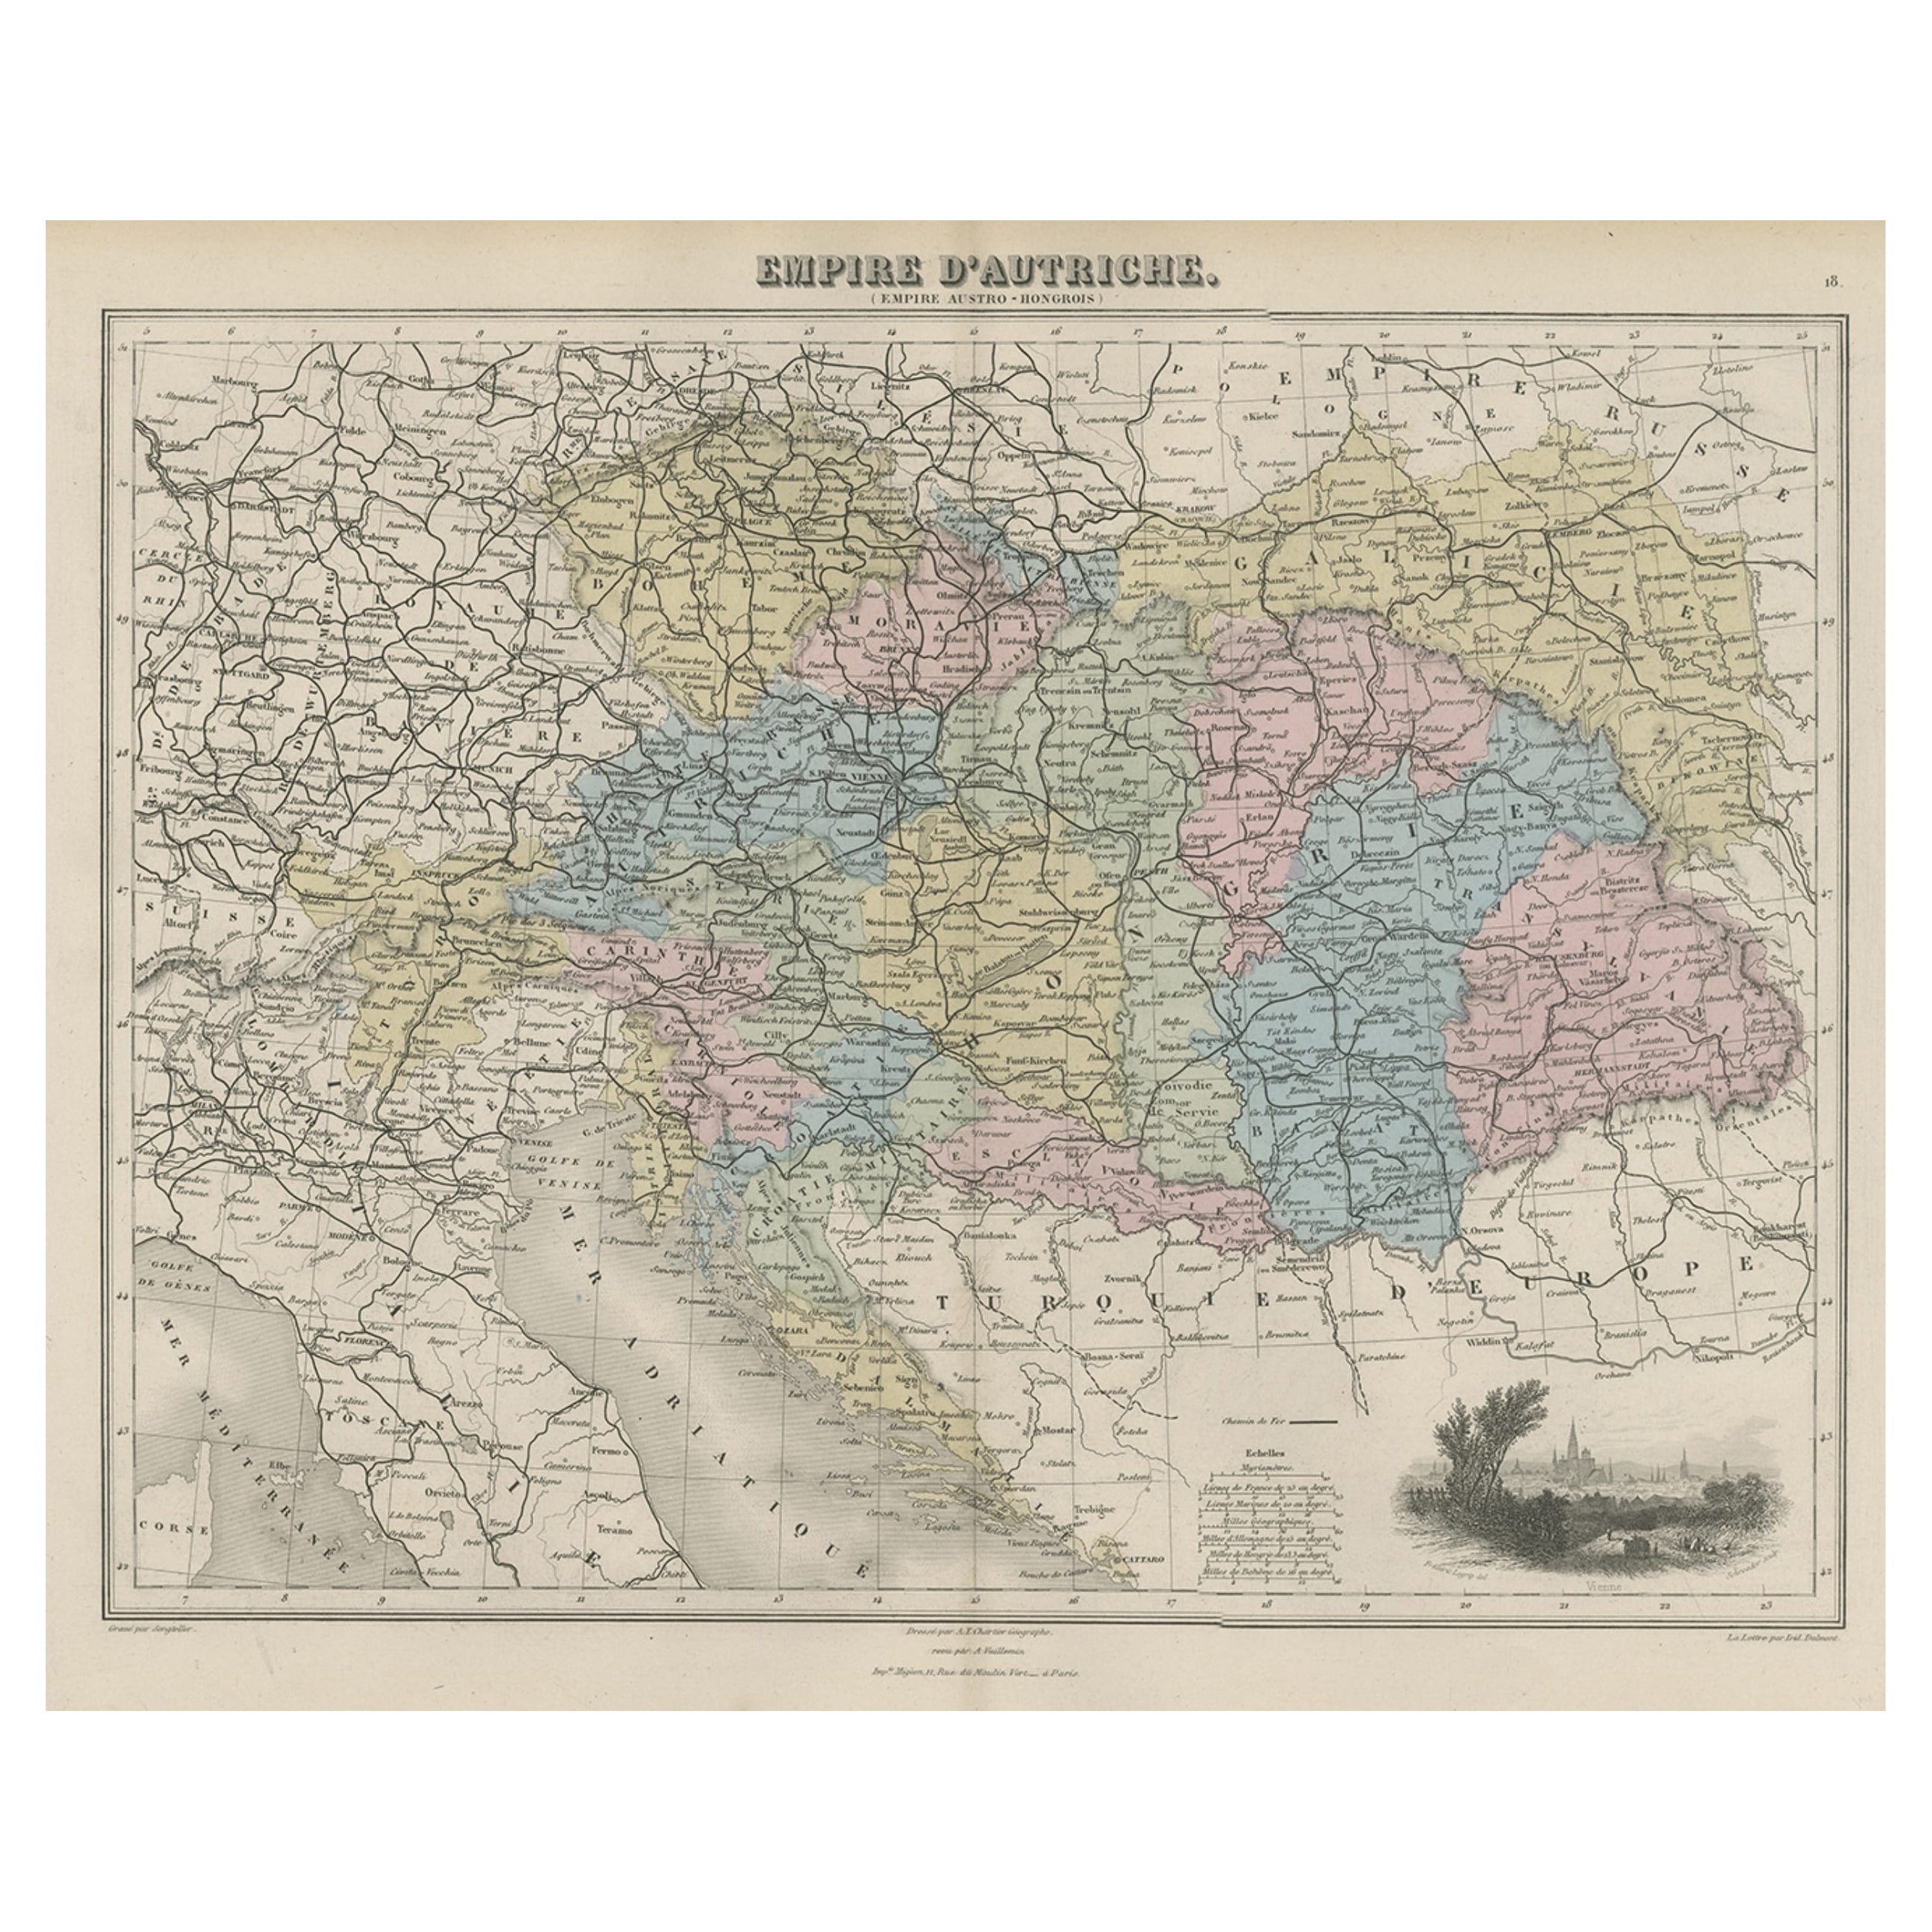 Old Map of the Austrian Empire with Decorative Vignette of Vienna, 1880